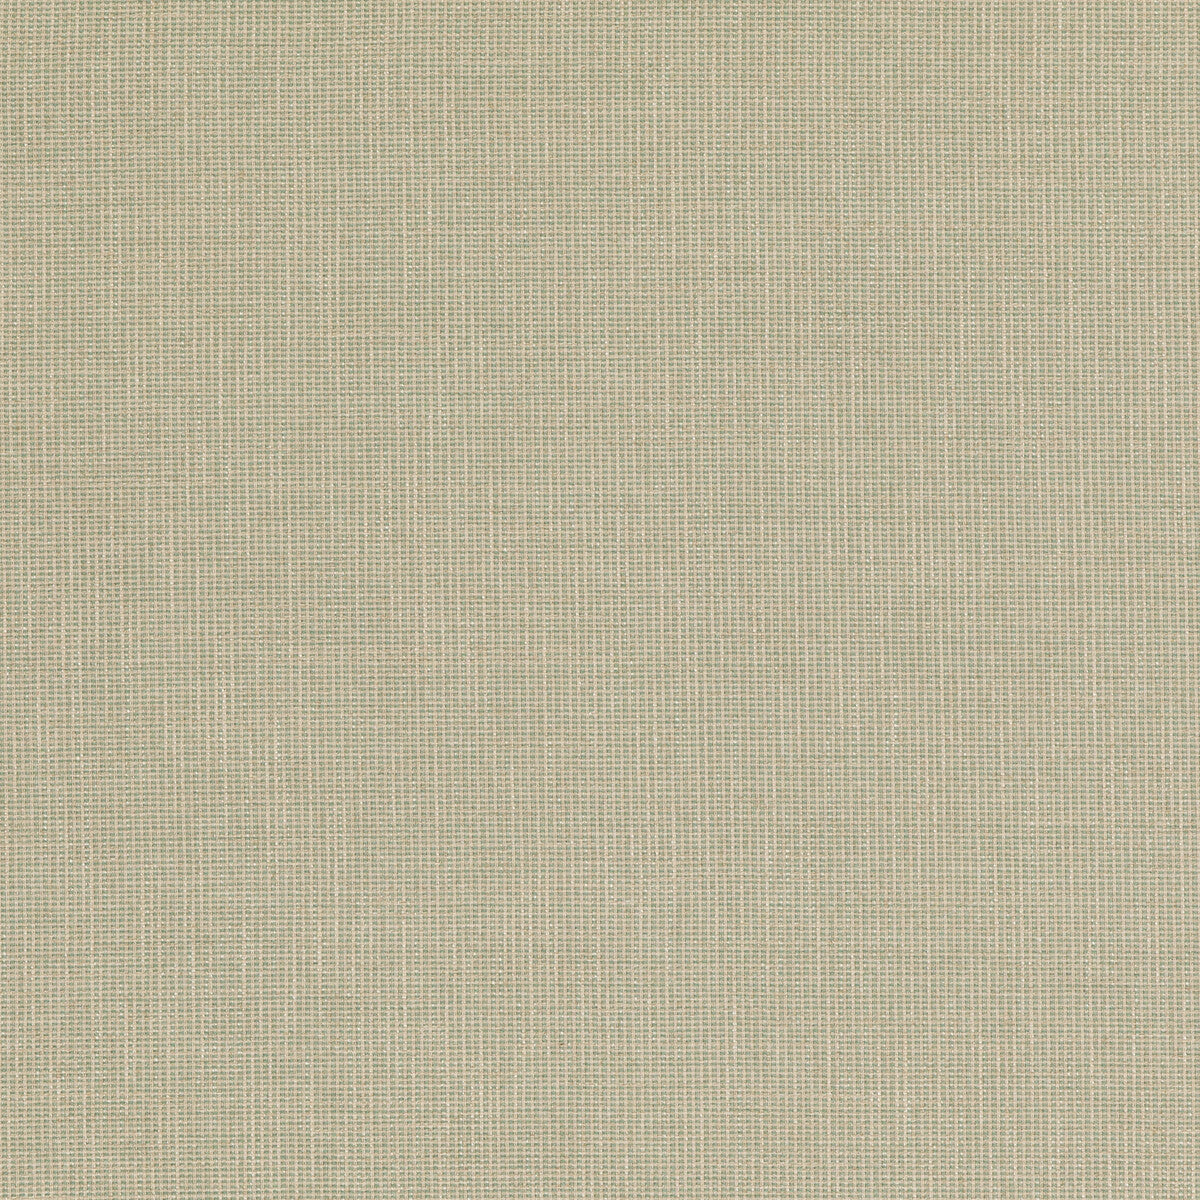 Folly fabric in soft aqua color - pattern PF50487.715.0 - by Baker Lifestyle in the Block Weaves collection